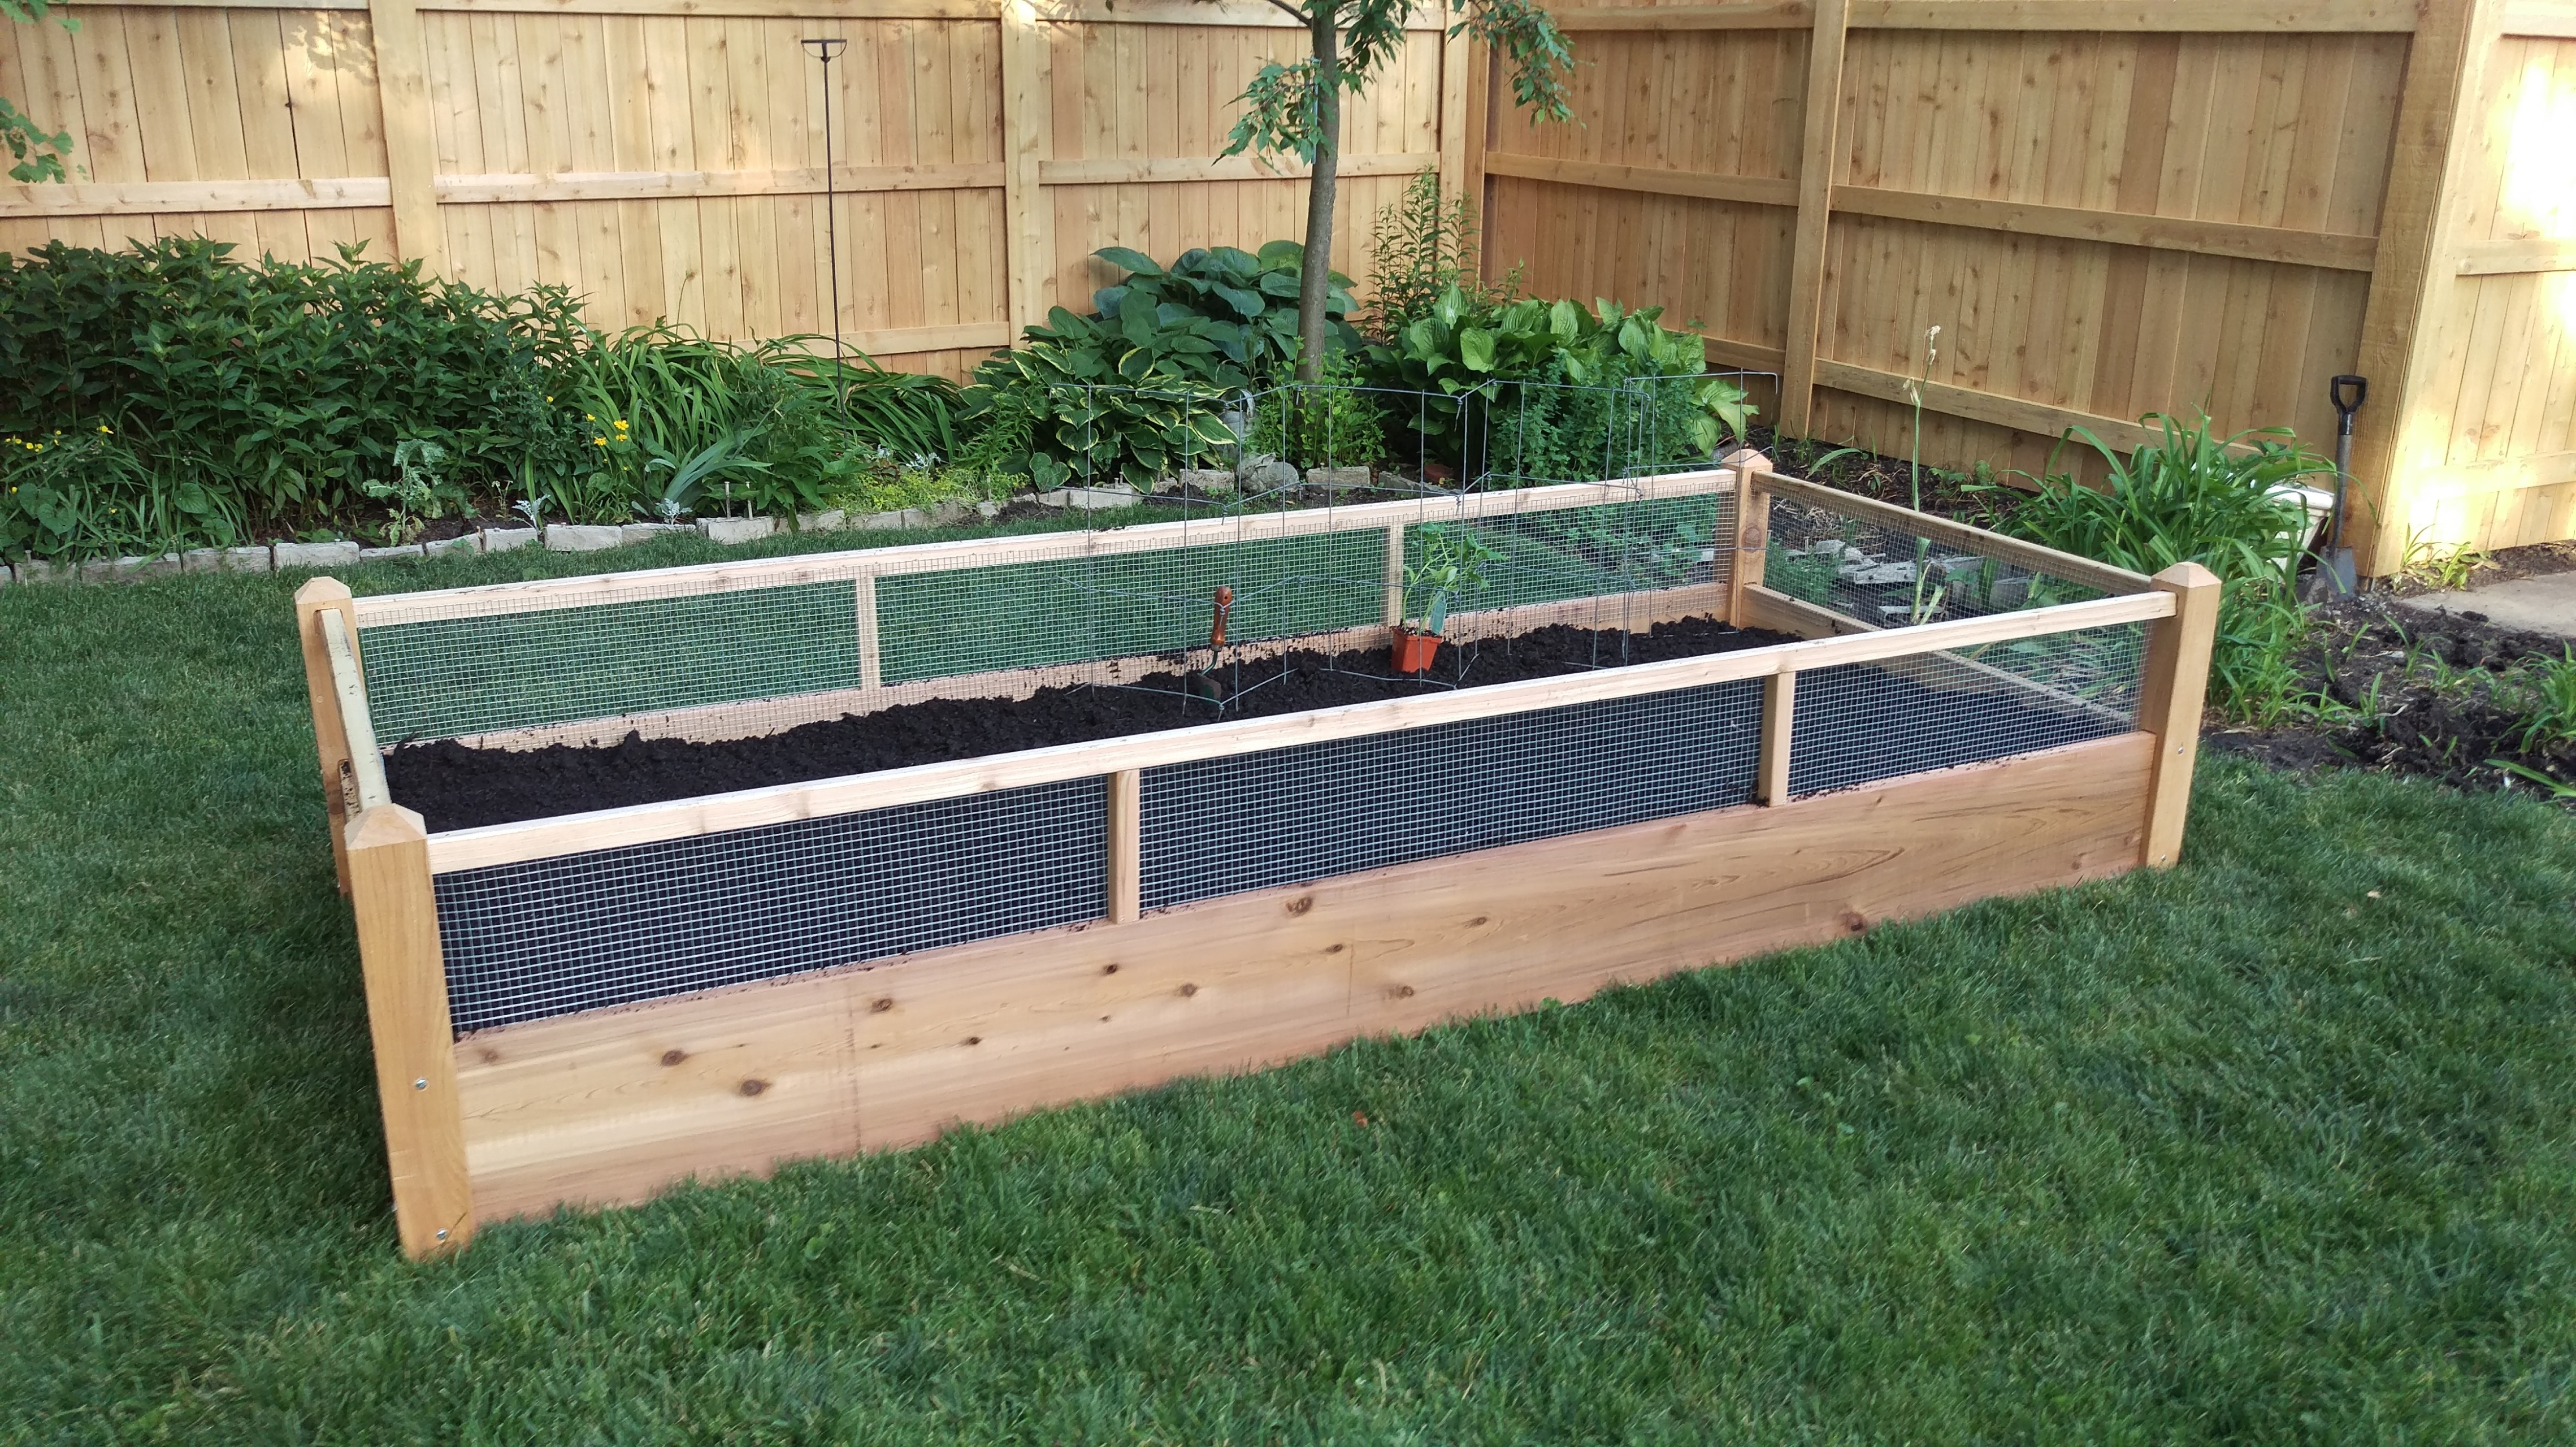 One 4x12x2 Raised Garden with Rabbit Railings Bed Delivered With Soil